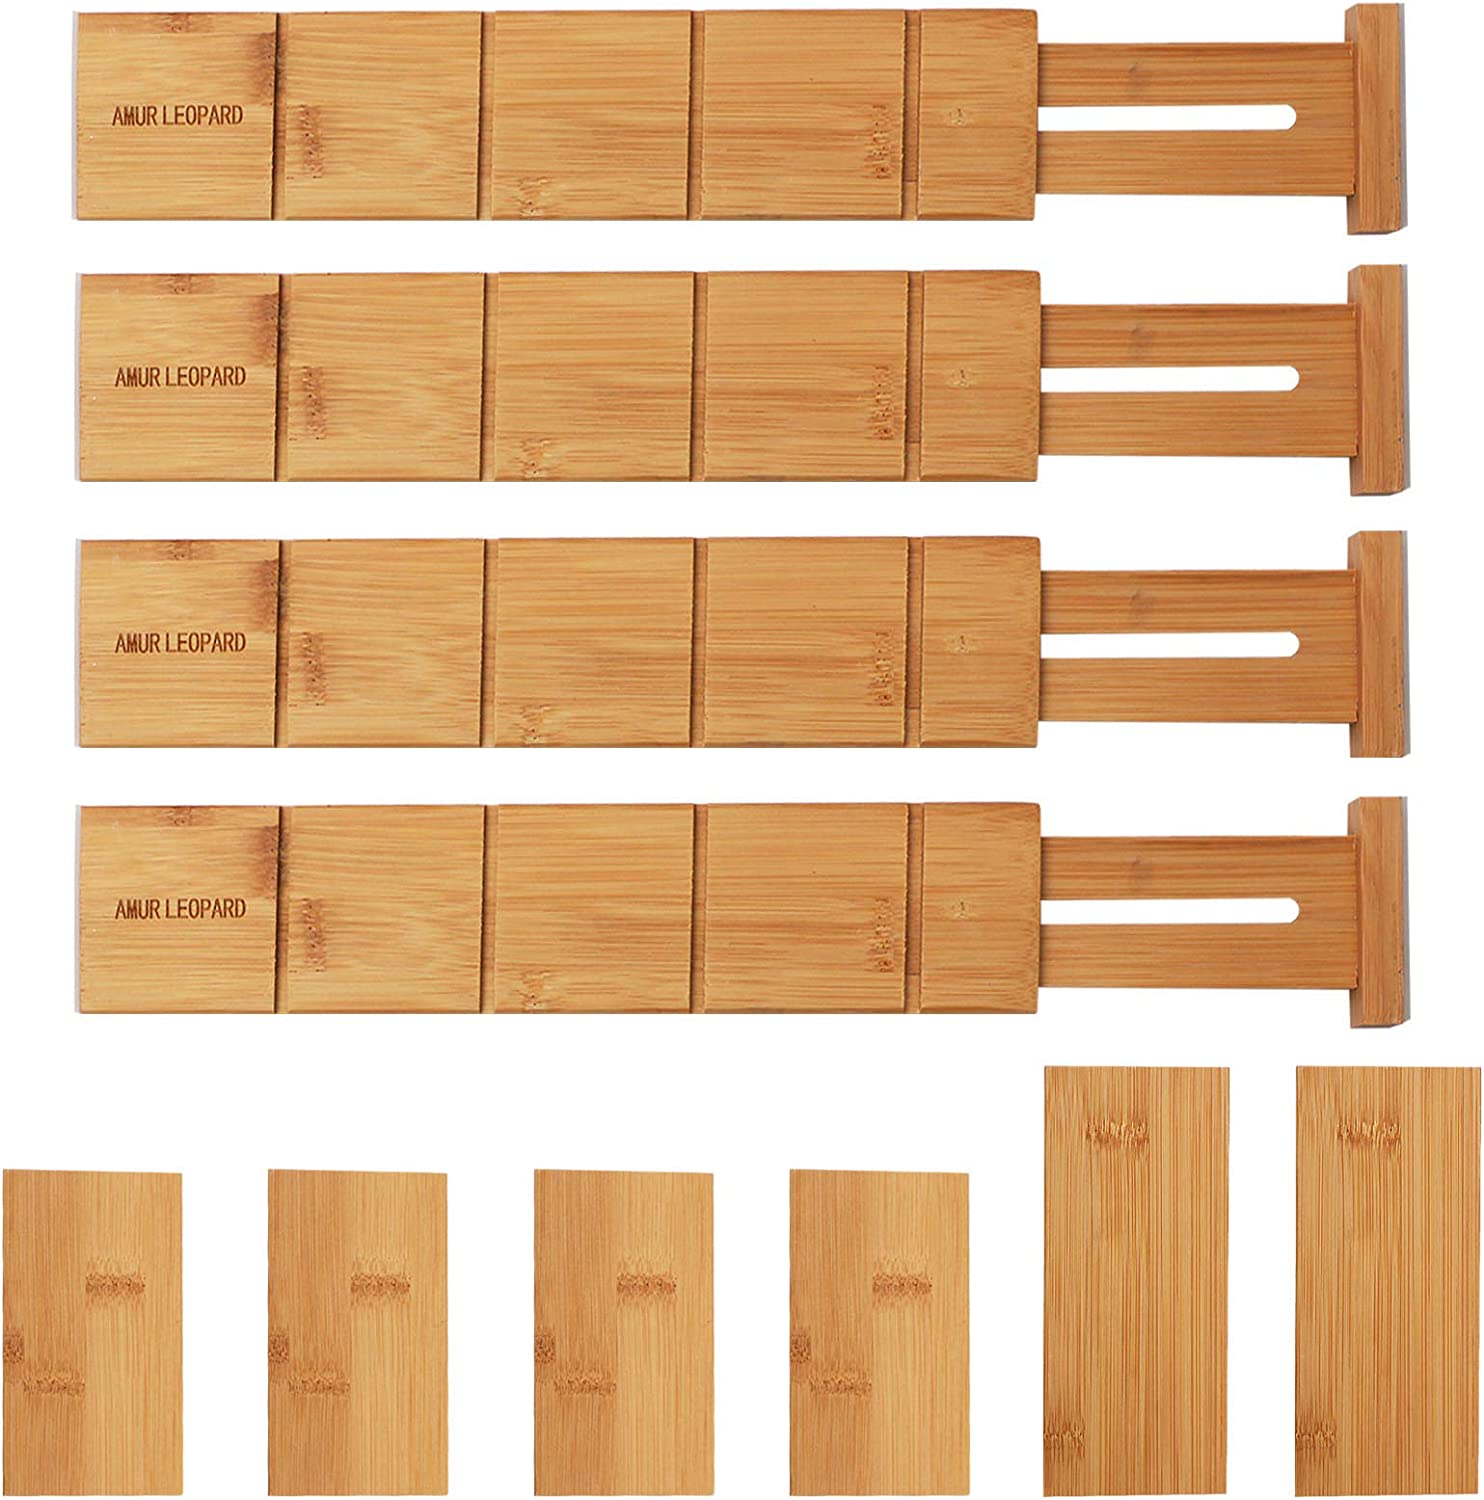 Bamboo Drawer Dividers Organizer Set of 4, with 6 Extra Mini Dividers, Adjustable Drawer Organizers,Expandable Drawer Organization for Kitchen, Dressers, Bathroom and Office (13.25-17 in) 